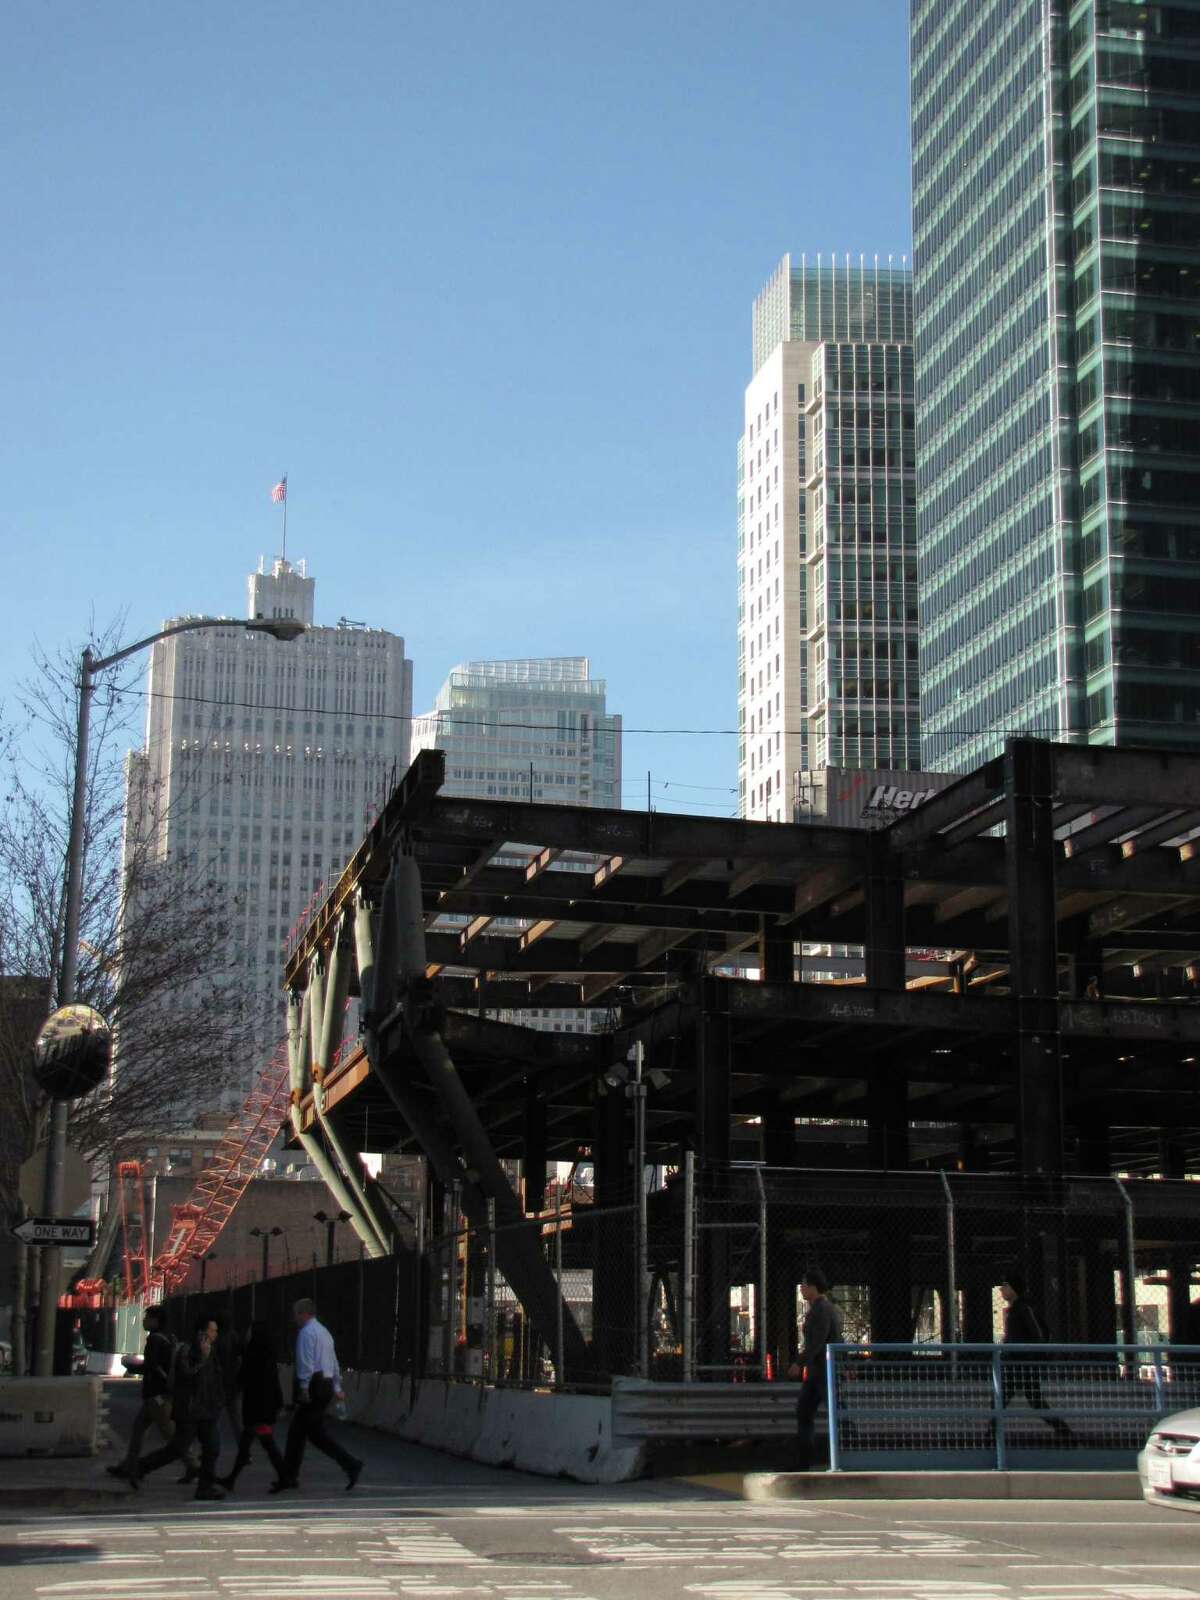 The initial above-ground sections of the new Transbay transit center as seen from First Street and Natoma alley. The target opening date is 2017.